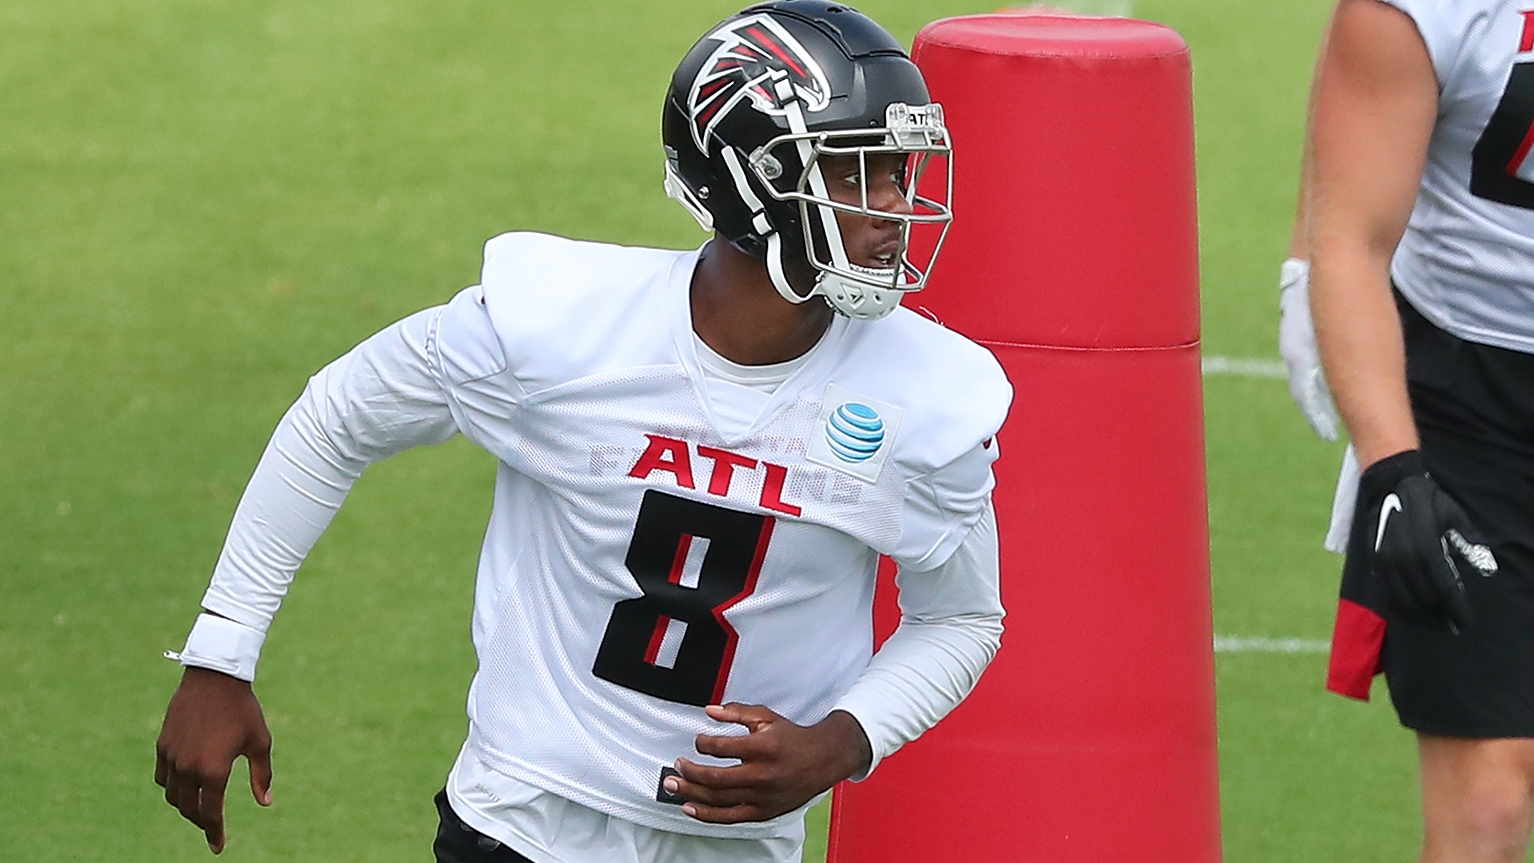 Draft pick Kyle Pitts signs 4-year deal with Atlanta Falcons